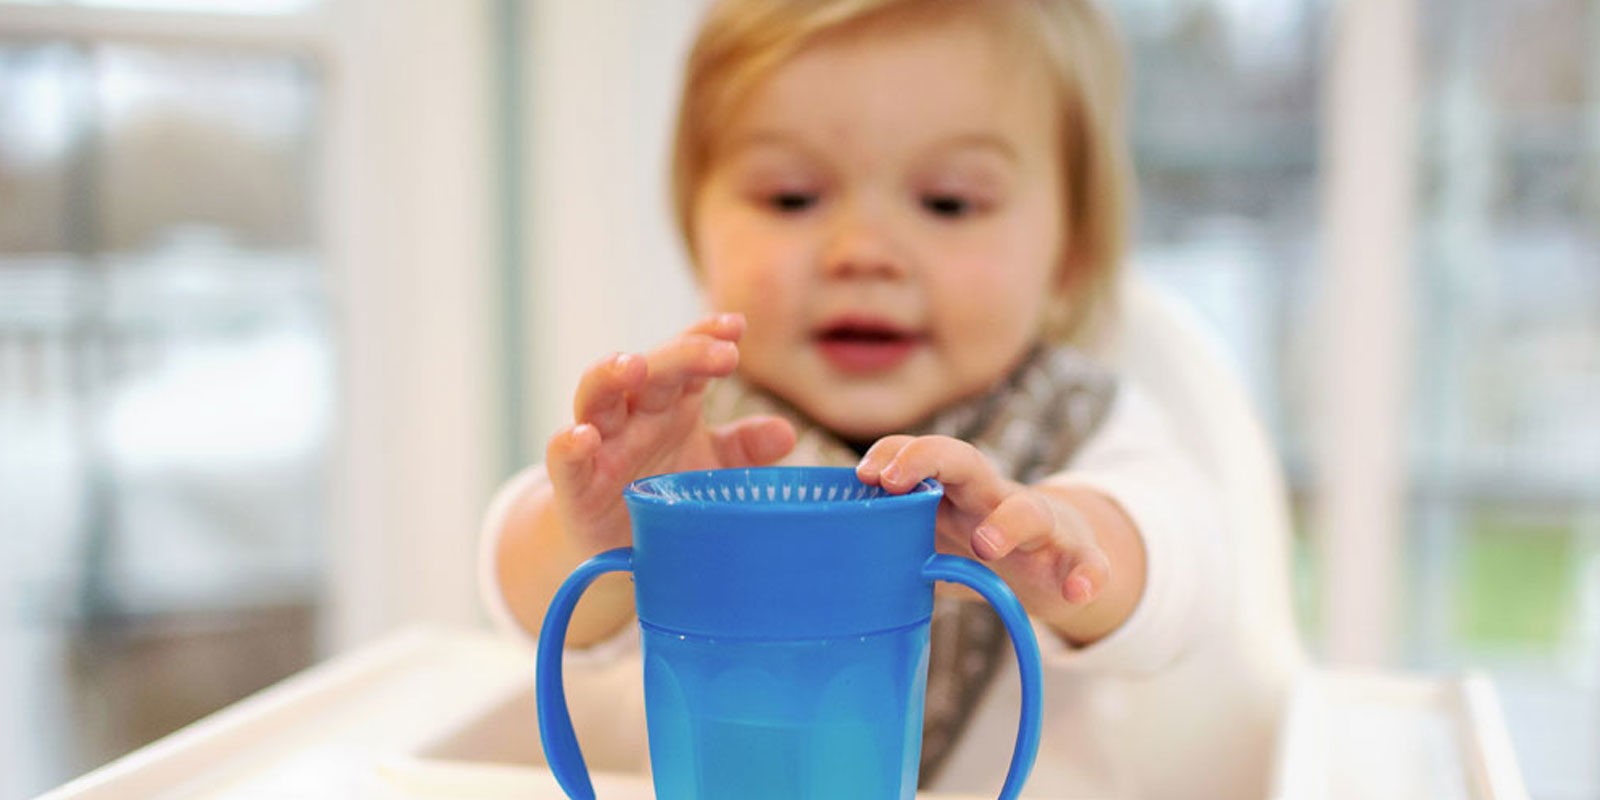 Toddler reaching for Cheers360 Cup